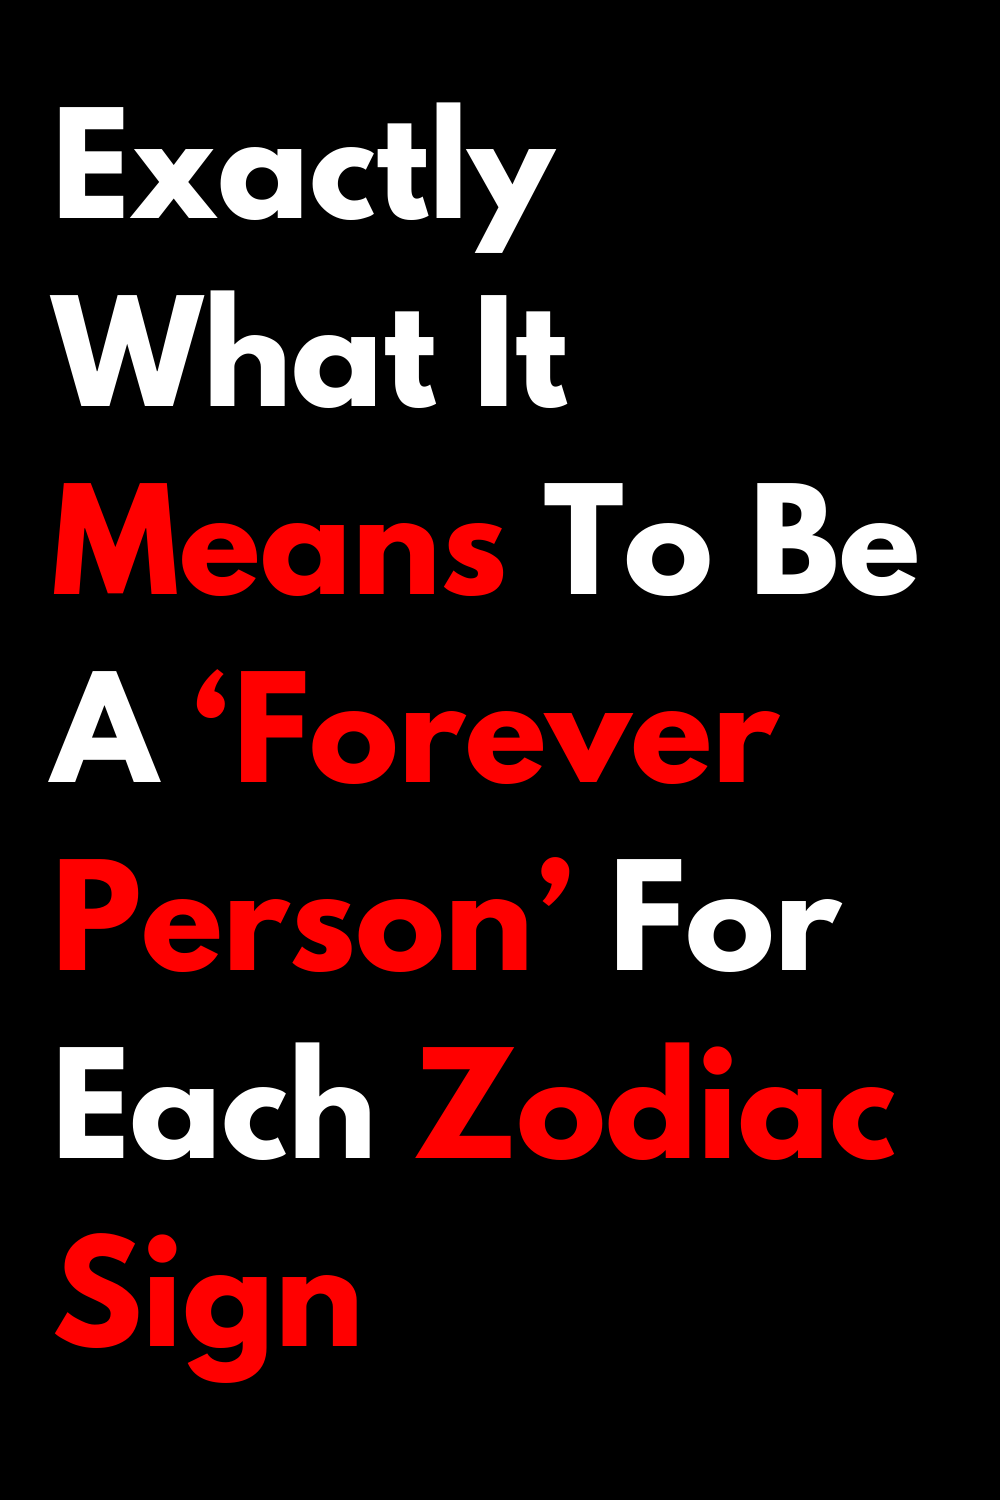 Exactly What It Means To Be A ‘Forever Person’ For Each Zodiac Sign